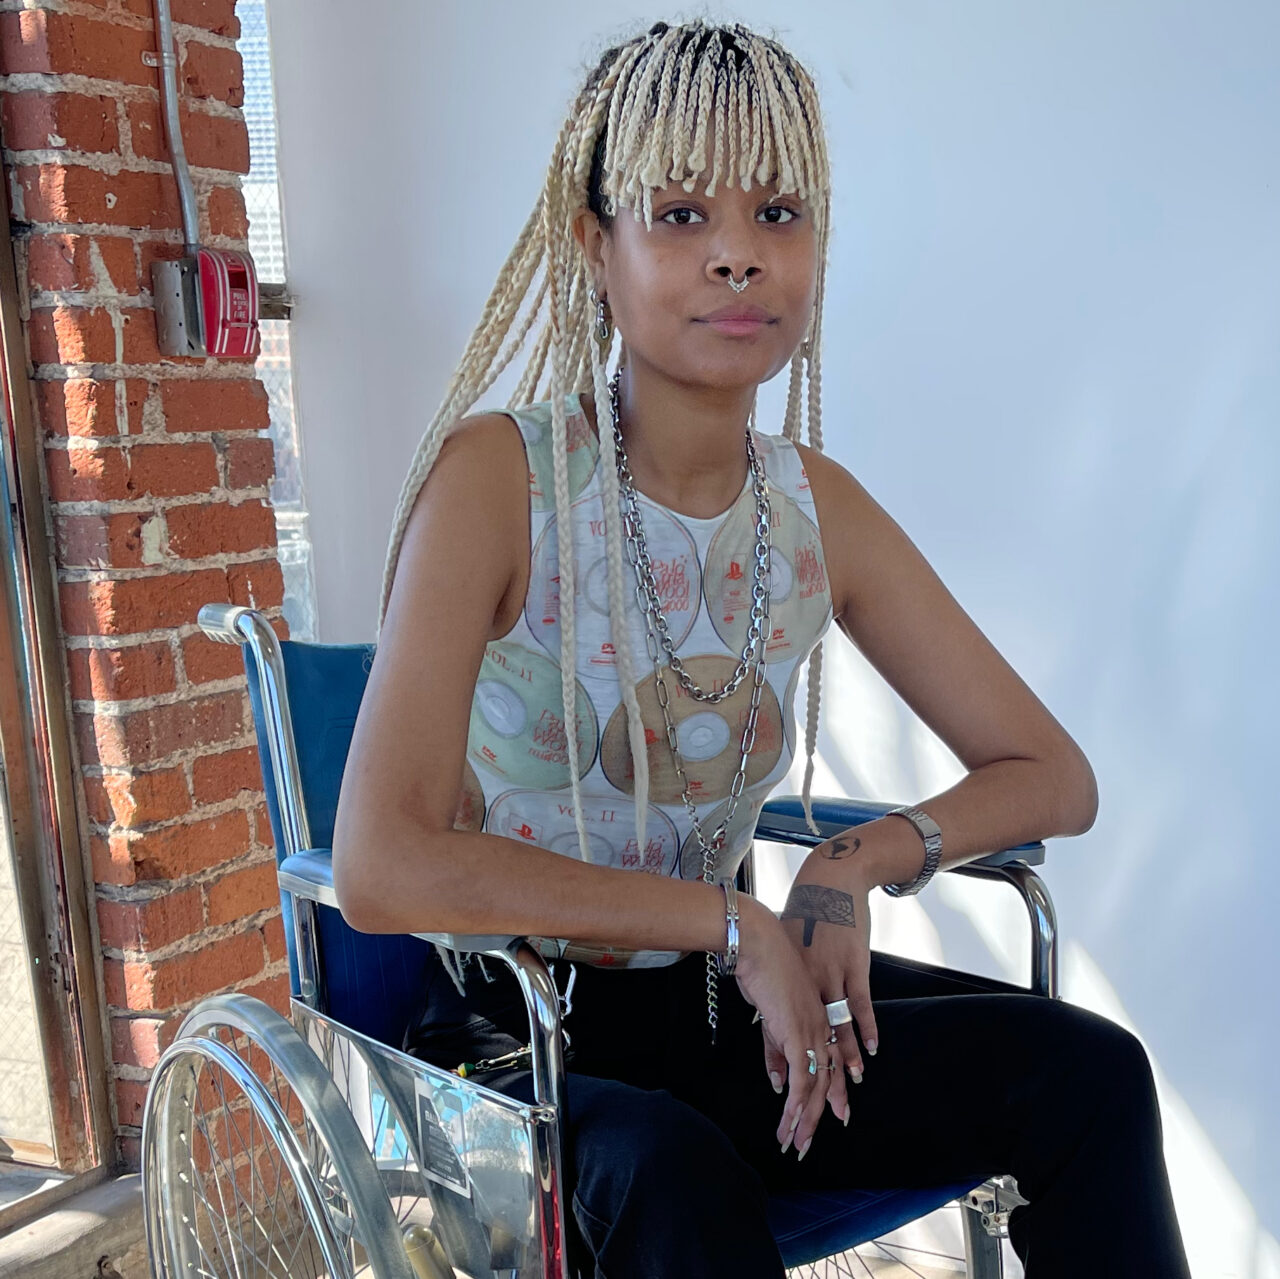 Panteha Abareshi sits in a blue leather-backed wheelchair. They are in a well-lit, brick and white-walled space, captured from the mid-bust upwards. They are wearing black pants, a sleeveless shirt printed with CDs and DVDs, silver chains around their neck, and silver rings on their fingers. Their hair is in blonde braids with bangs.